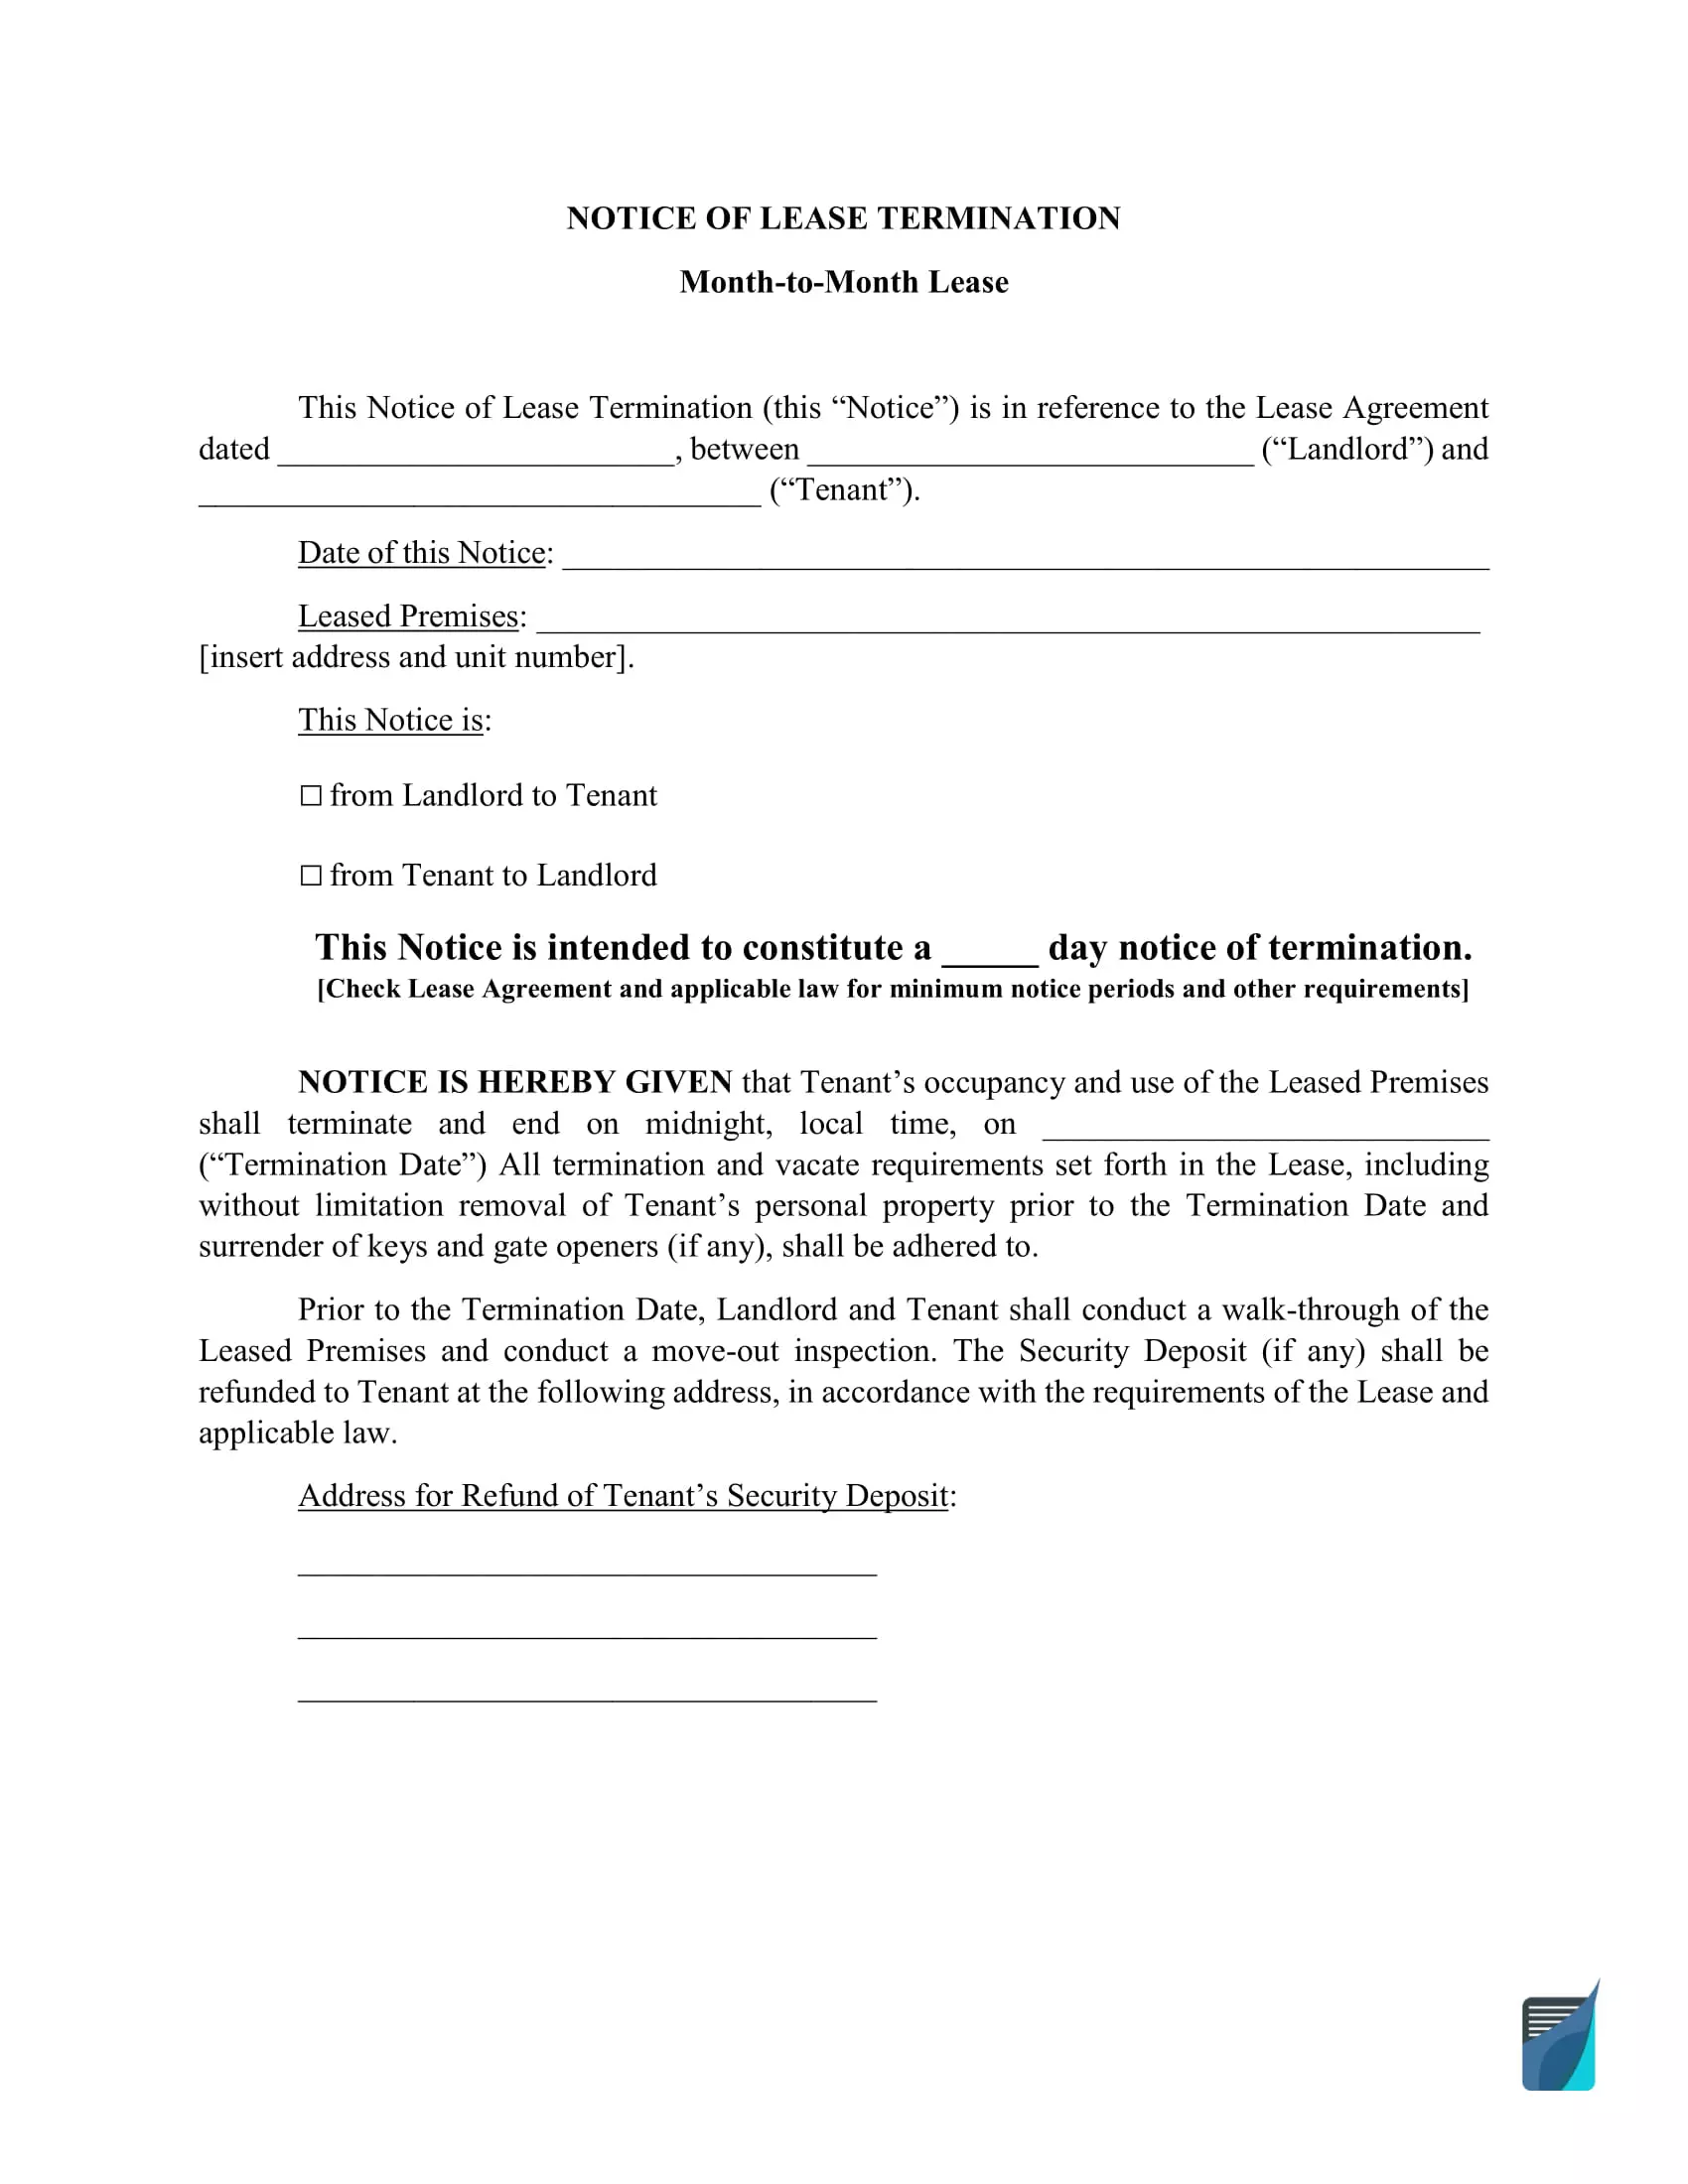 Notice of Lease Termination Form